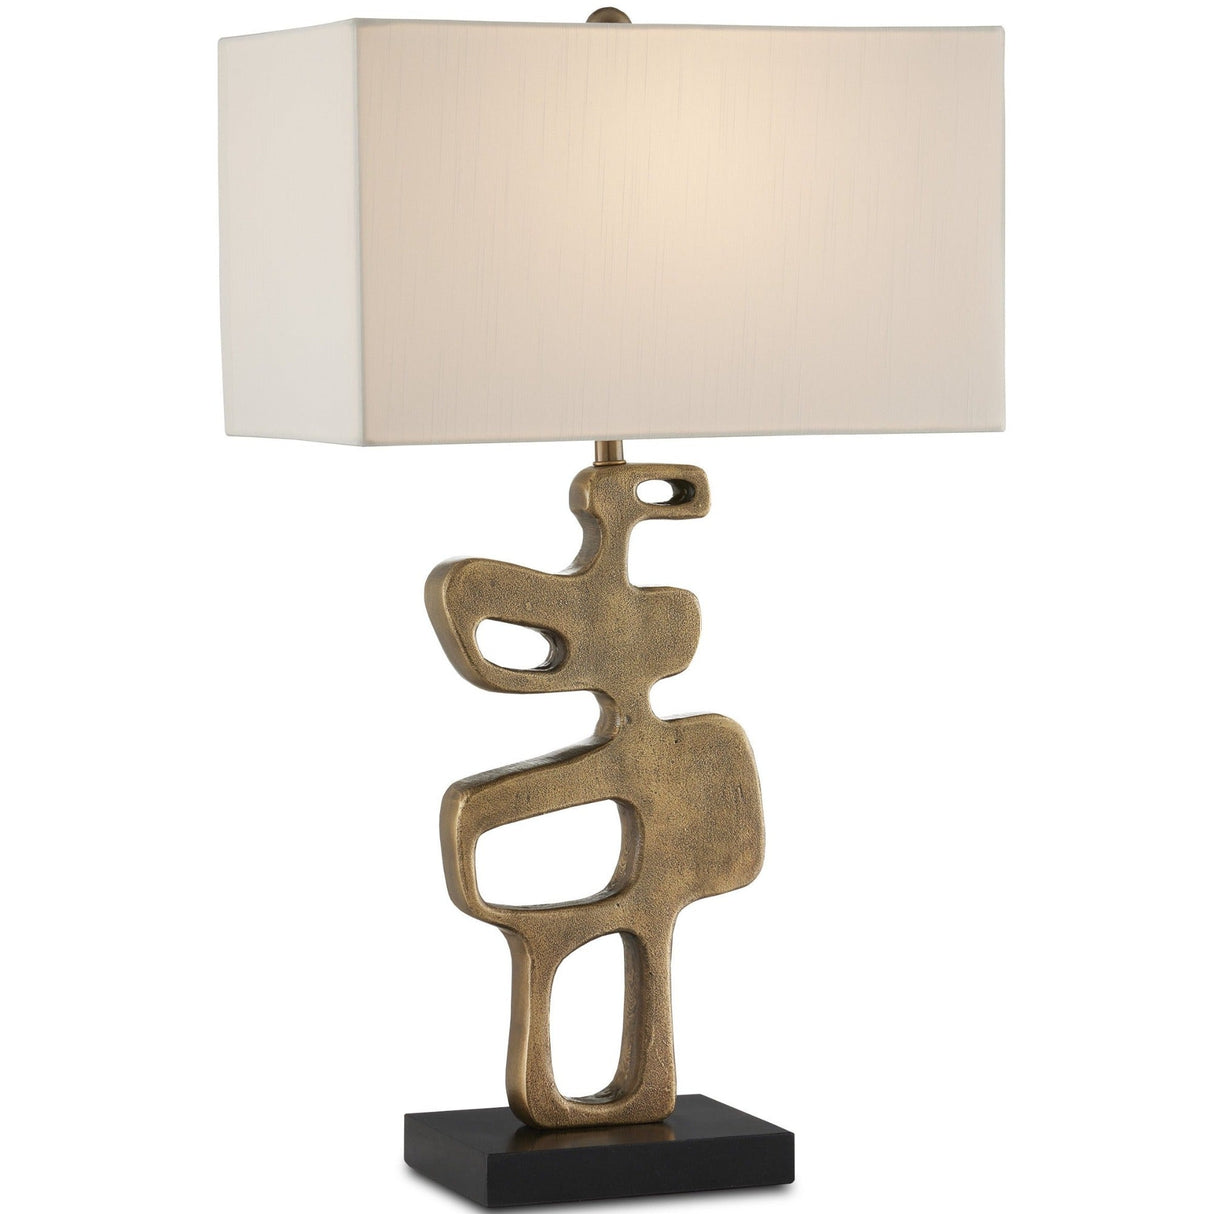 Currey & Company Mithra Brass Table Lamp